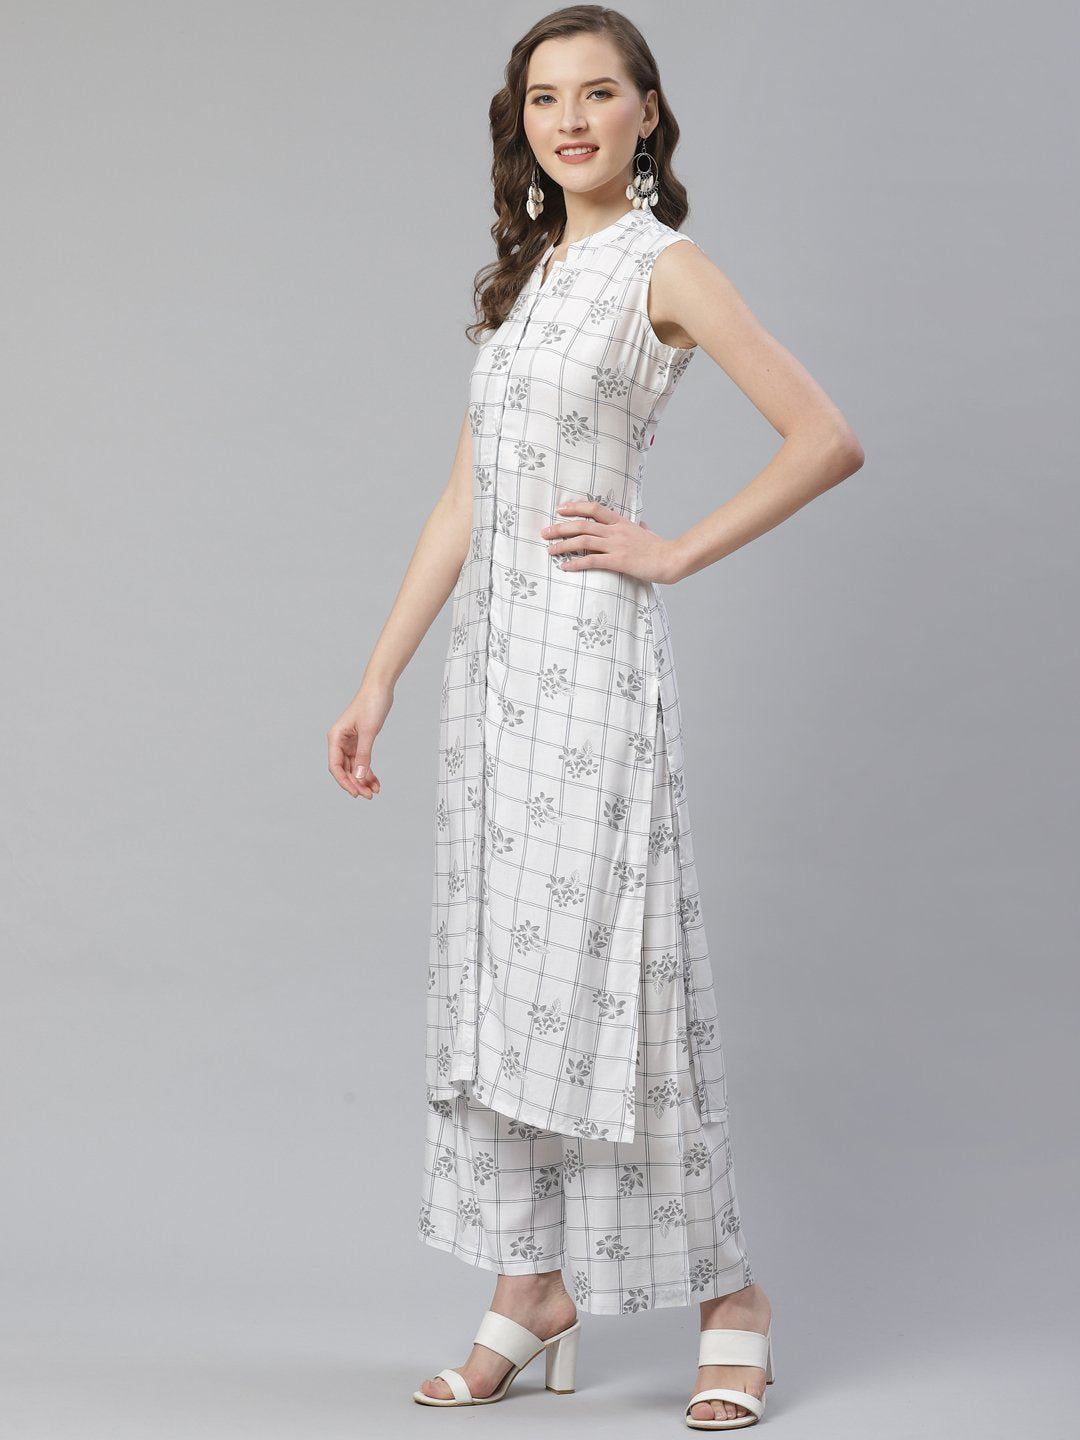 Women's White & Black Floral Printed Kurta with Palazzos - Jompers